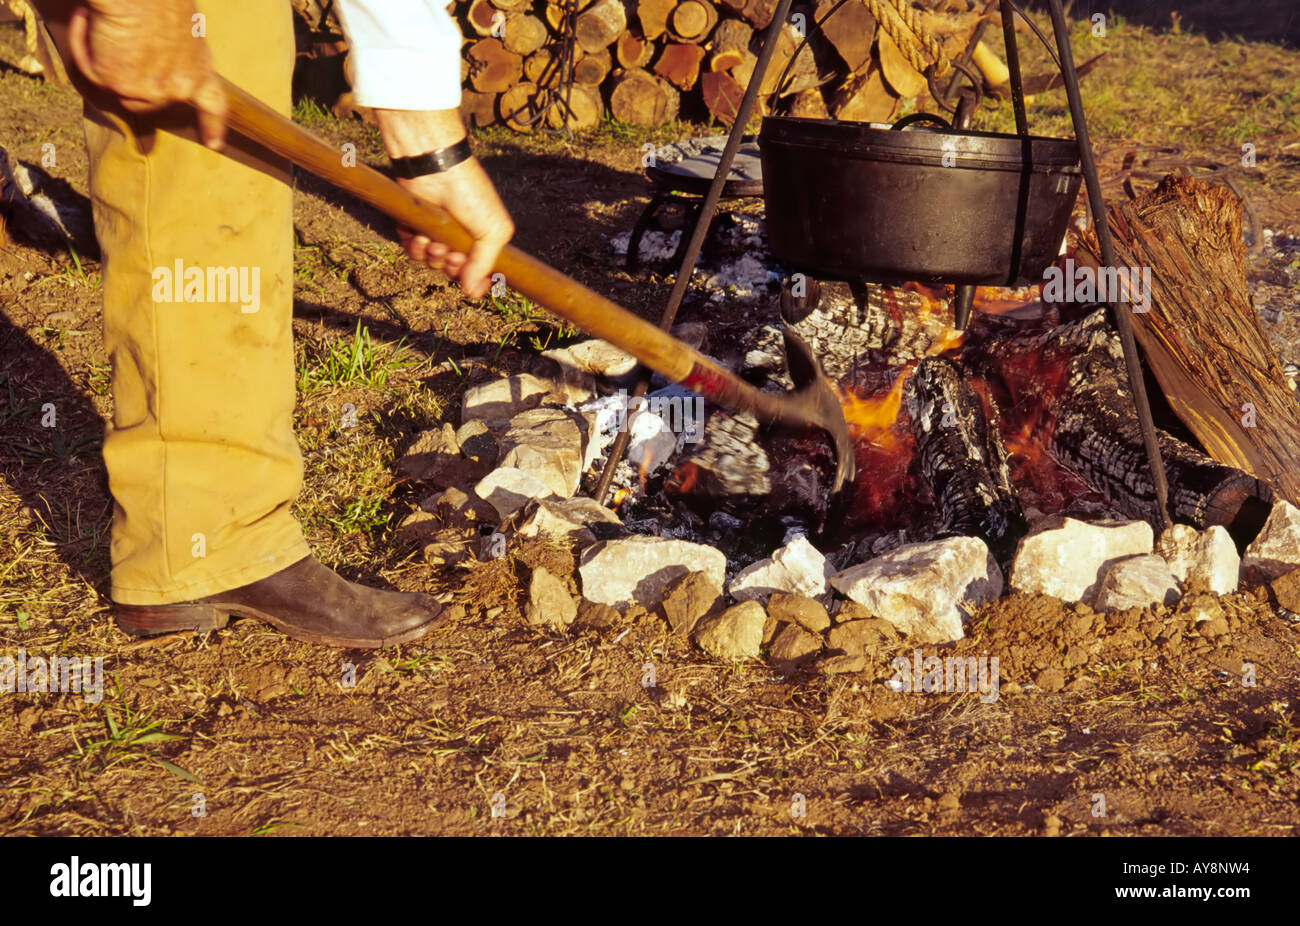 https://c8.alamy.com/comp/AY8NW4/cooking-breakfast-in-a-cast-iron-pot-over-a-wood-fire-at-the-cowboy-AY8NW4.jpg